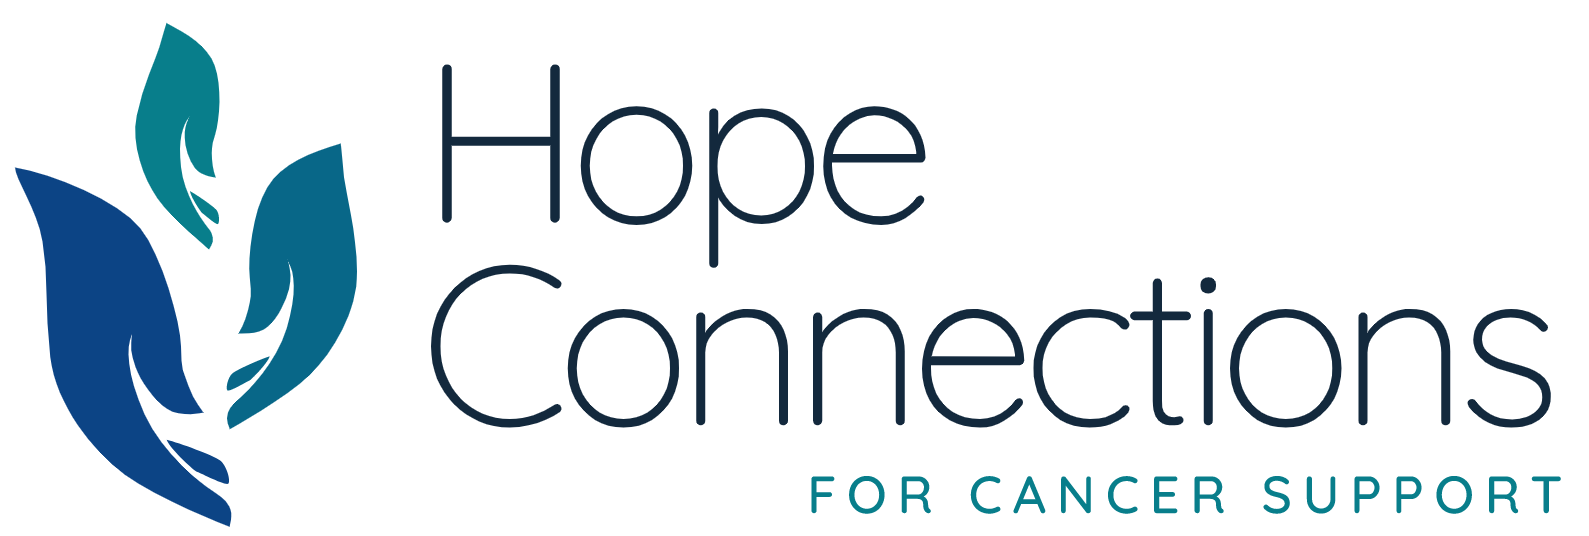 Hope Connections for Cancer Support